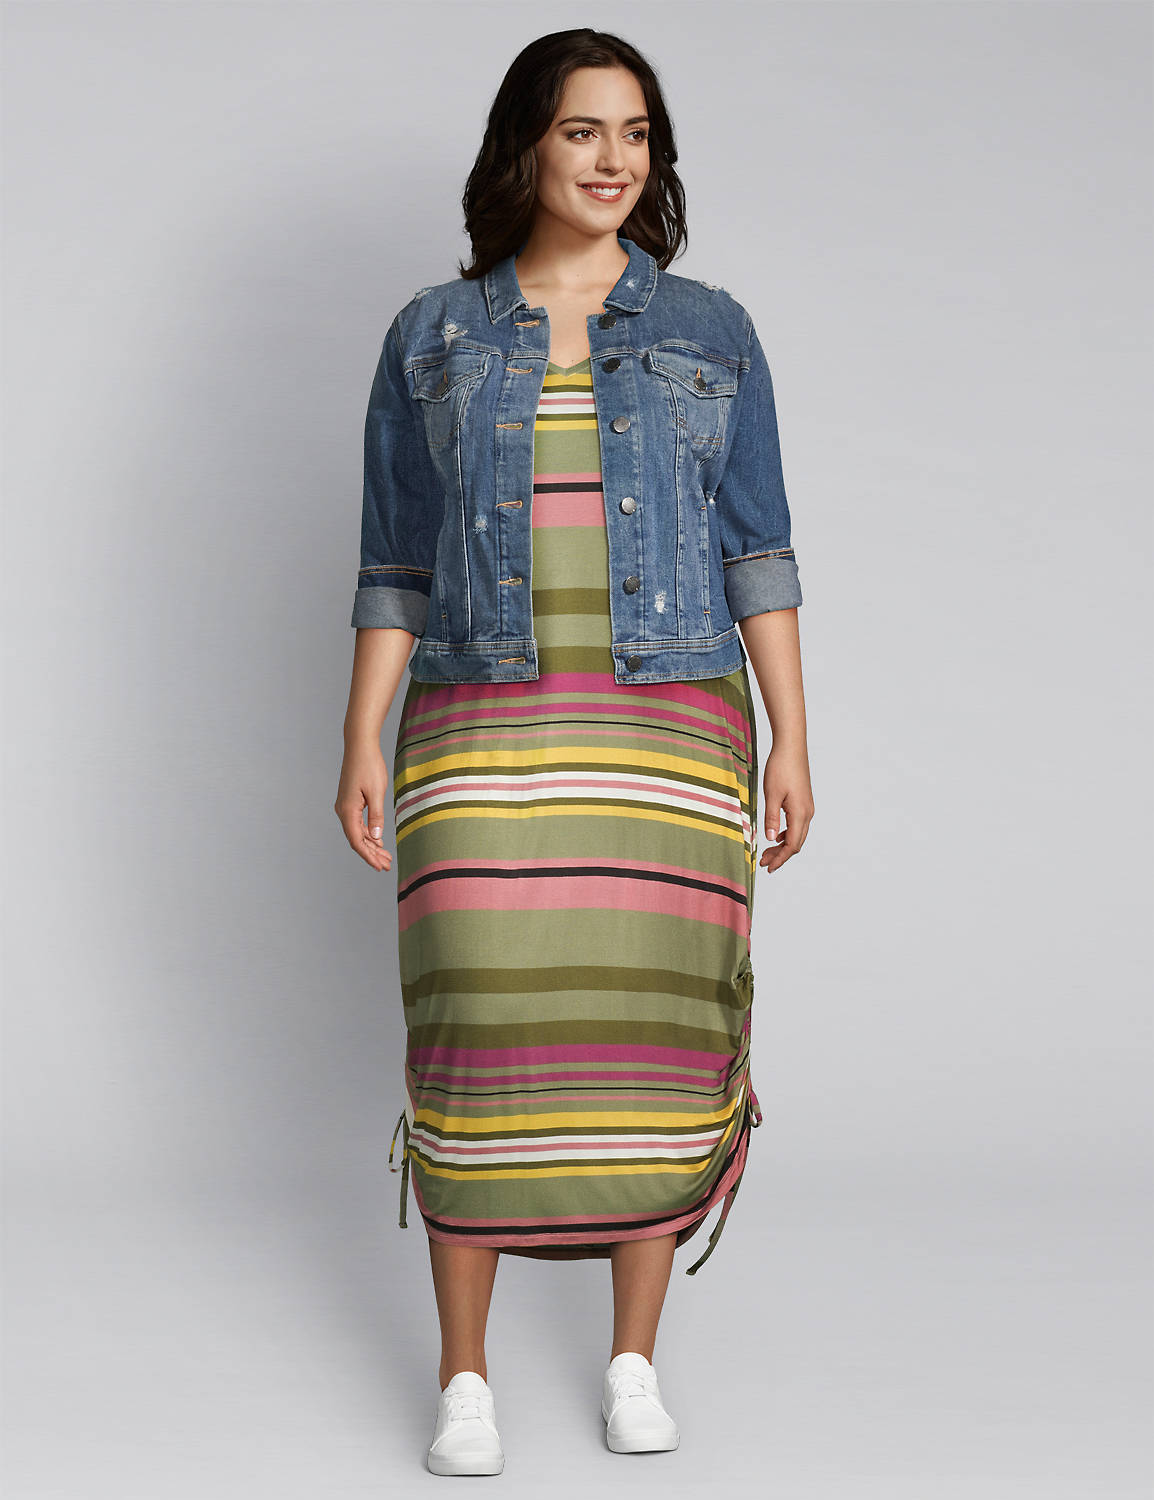 1114835 Sleeveless Vneck Side Ruched Midi - 190:LBSU20249_MultiSalsaStripe_ccolorway6:10/12 Product Image 3